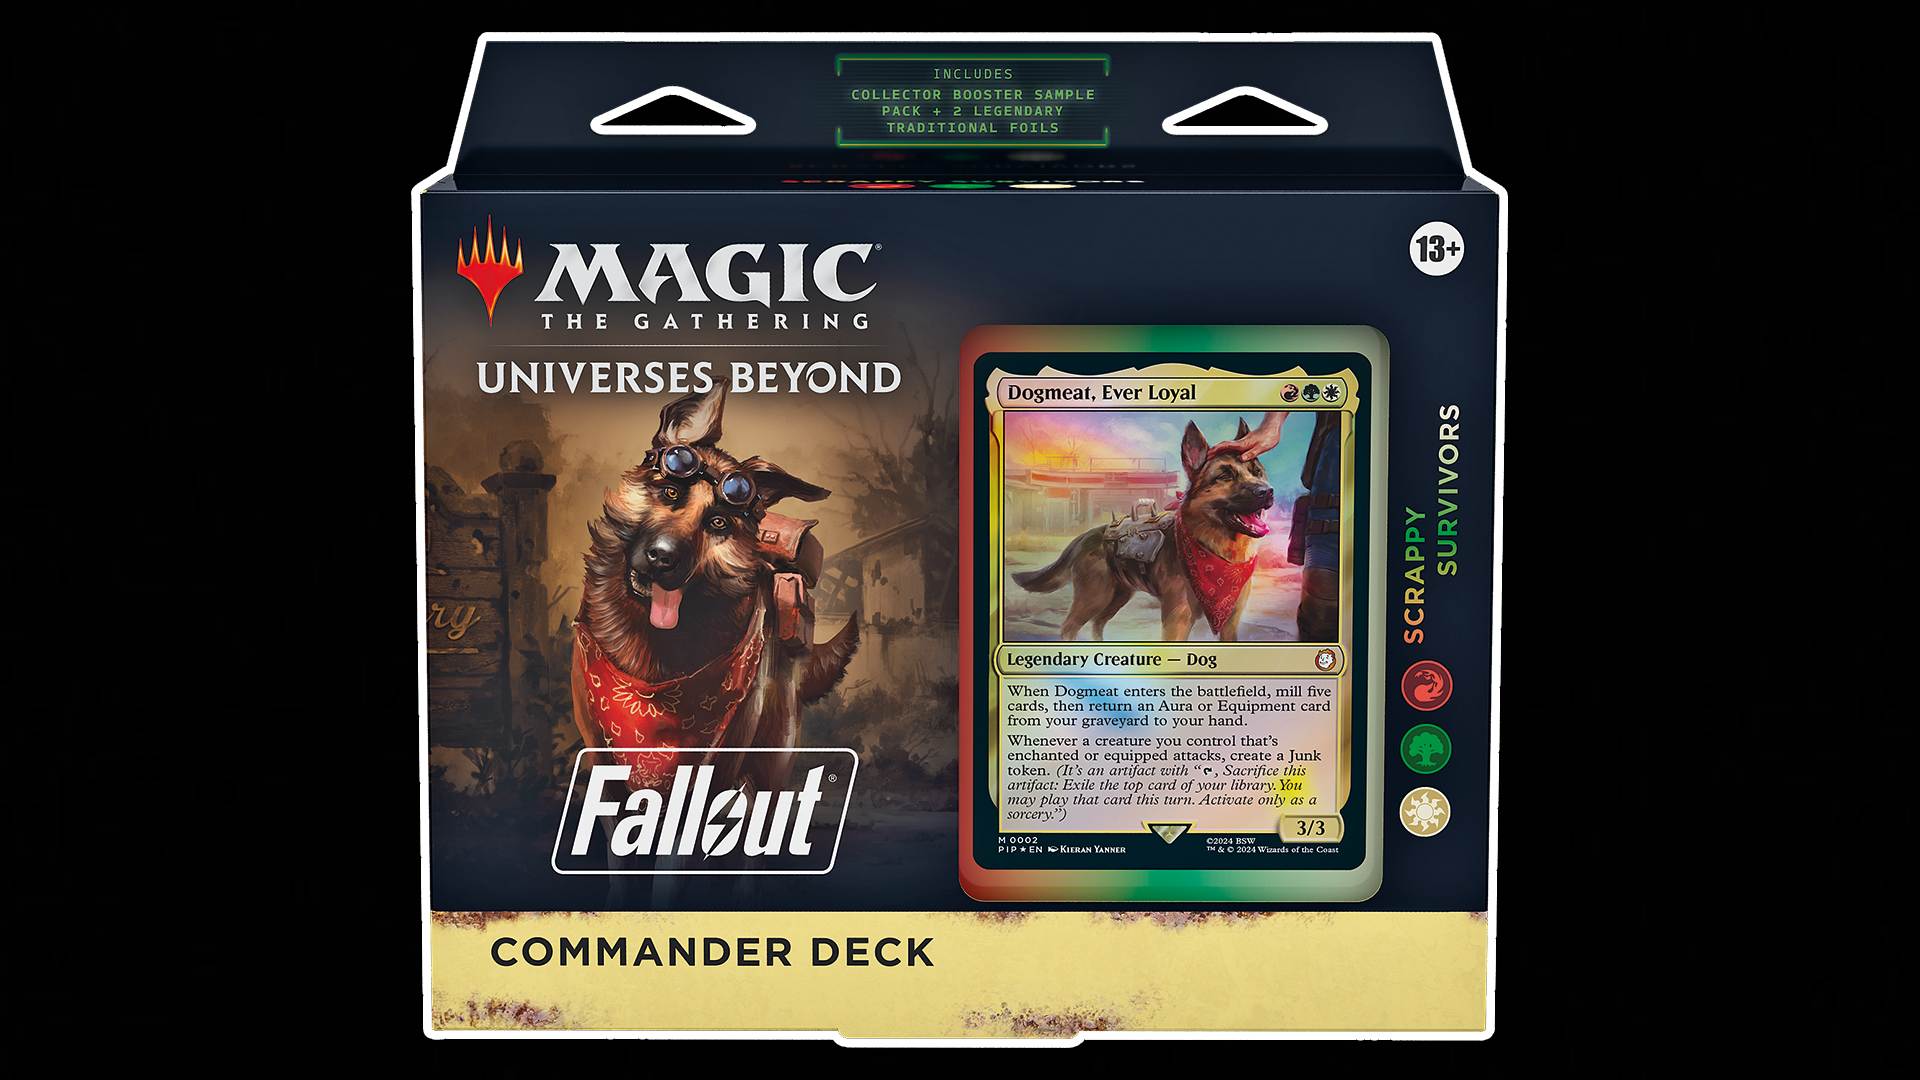 Magic: The Gathering Fallout deck